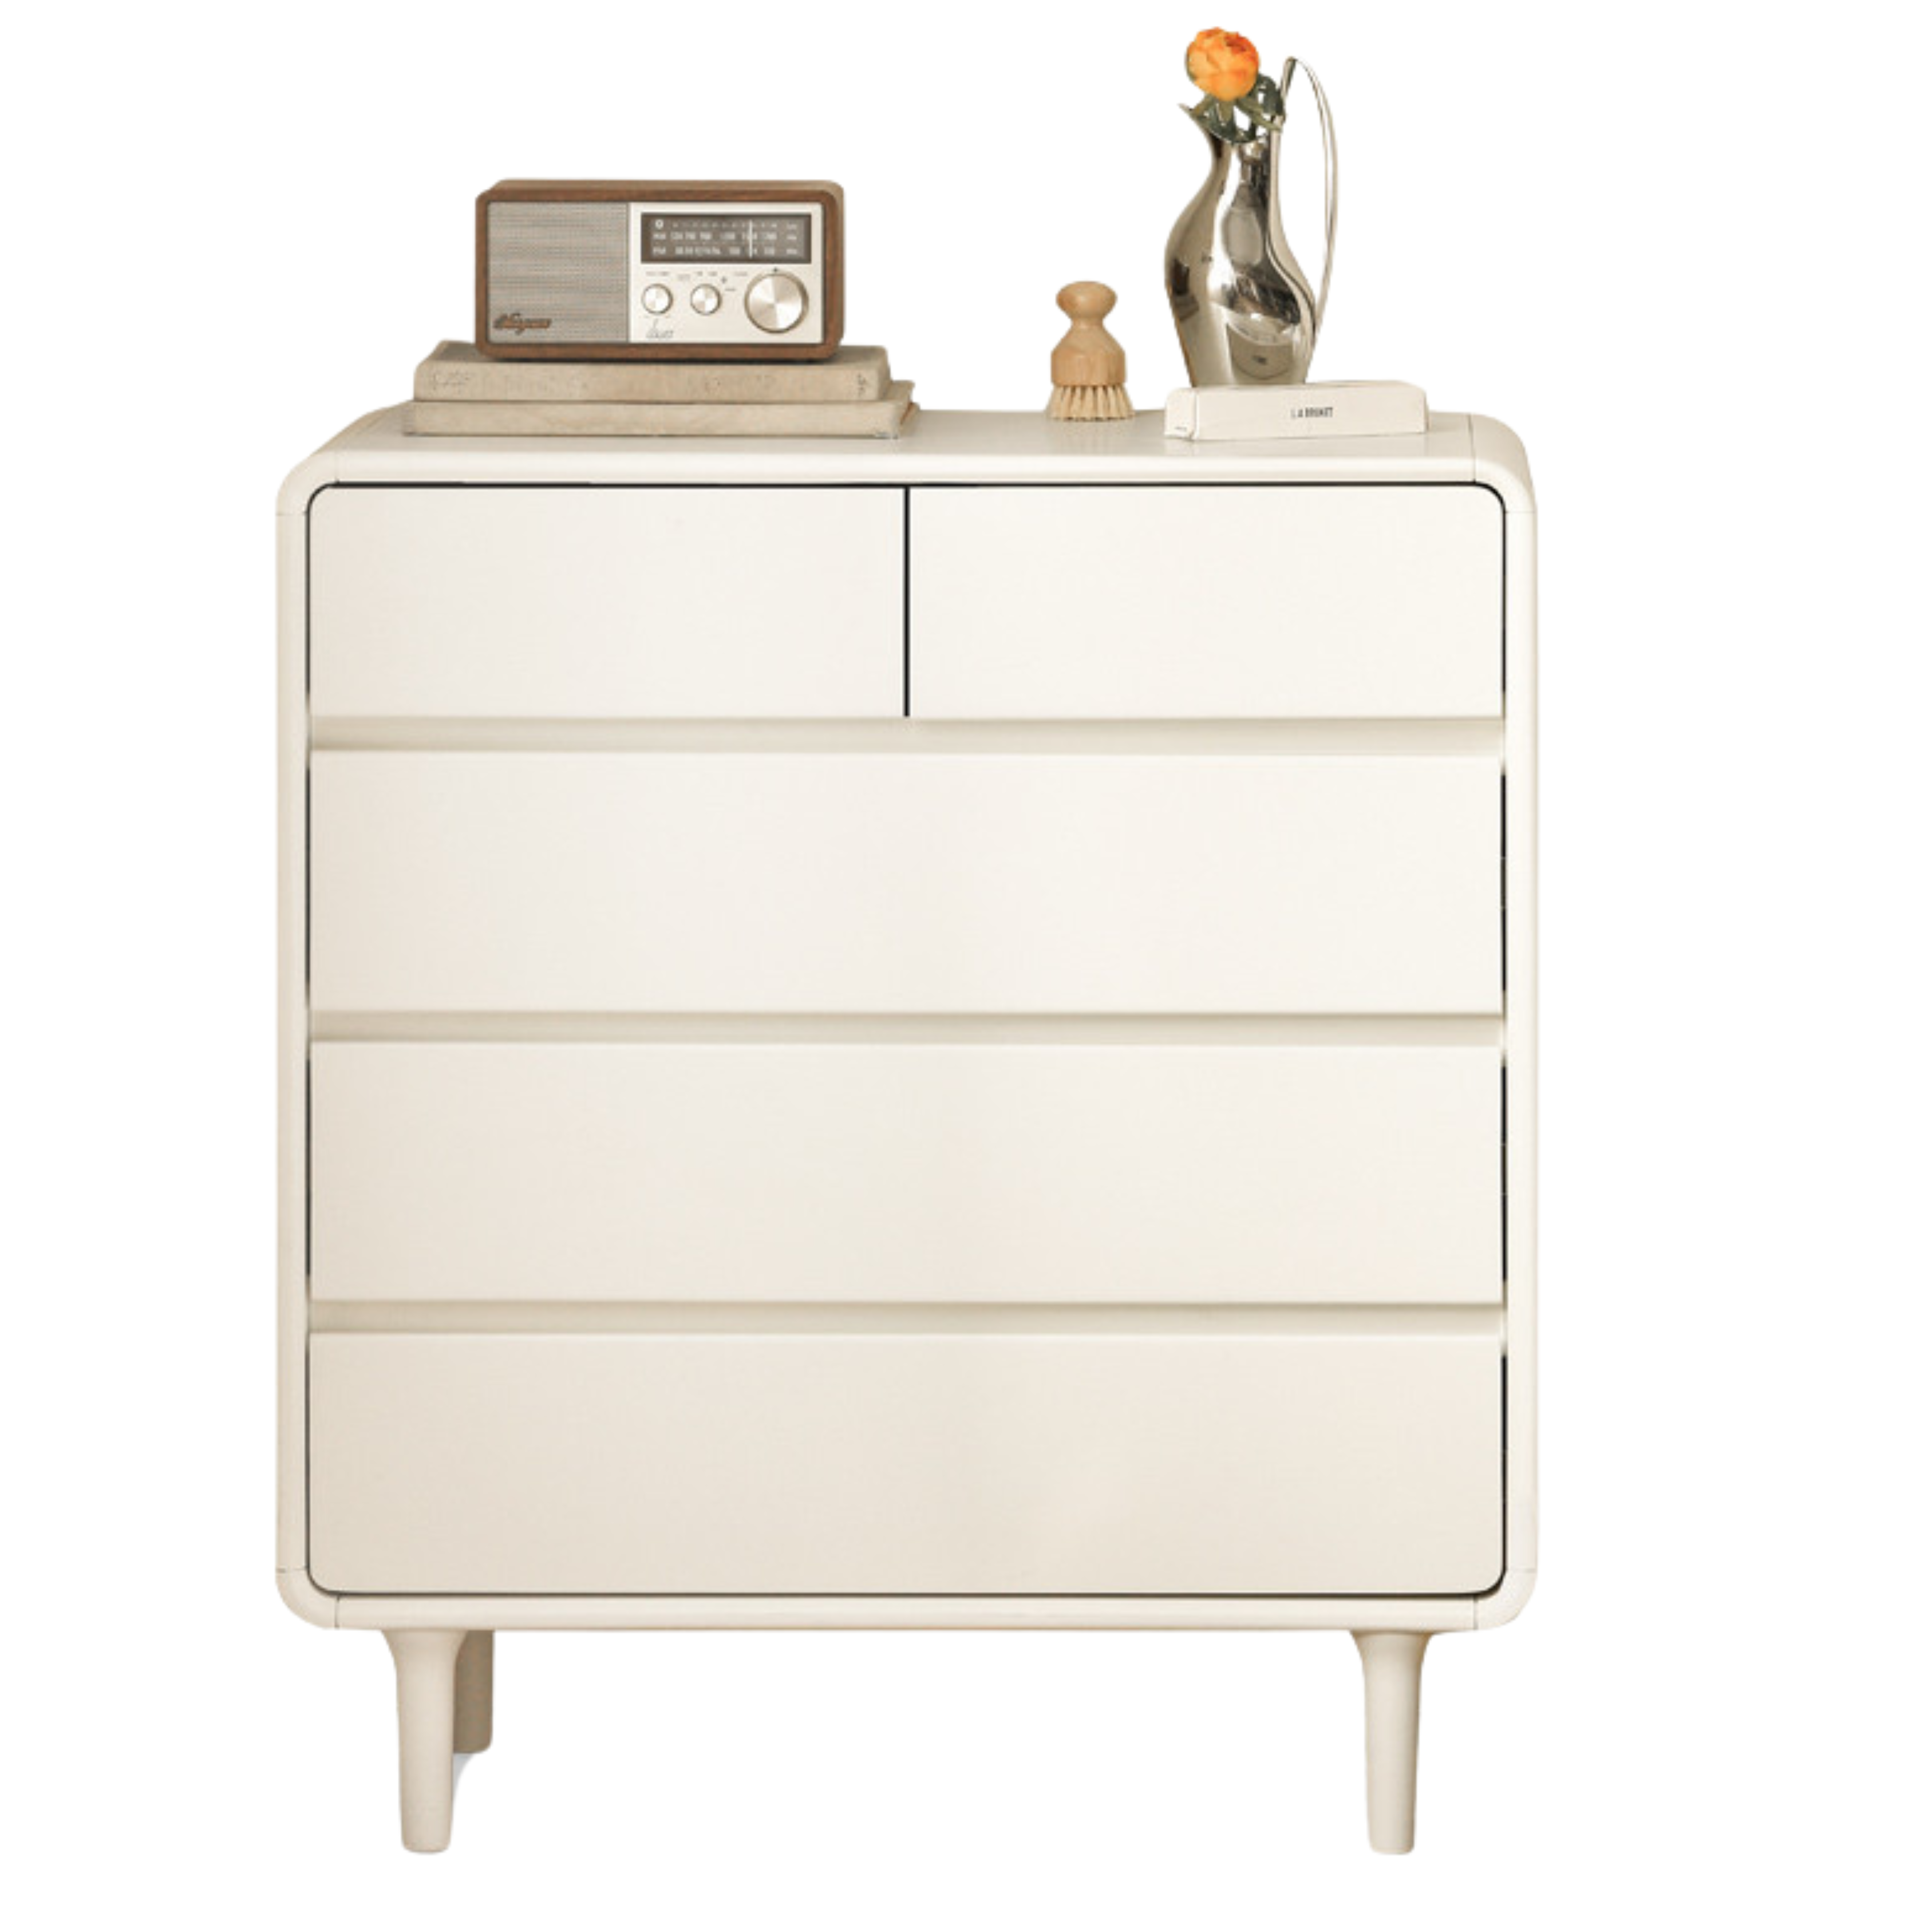 Poplar solid wood Milky cream style Chest of drawers